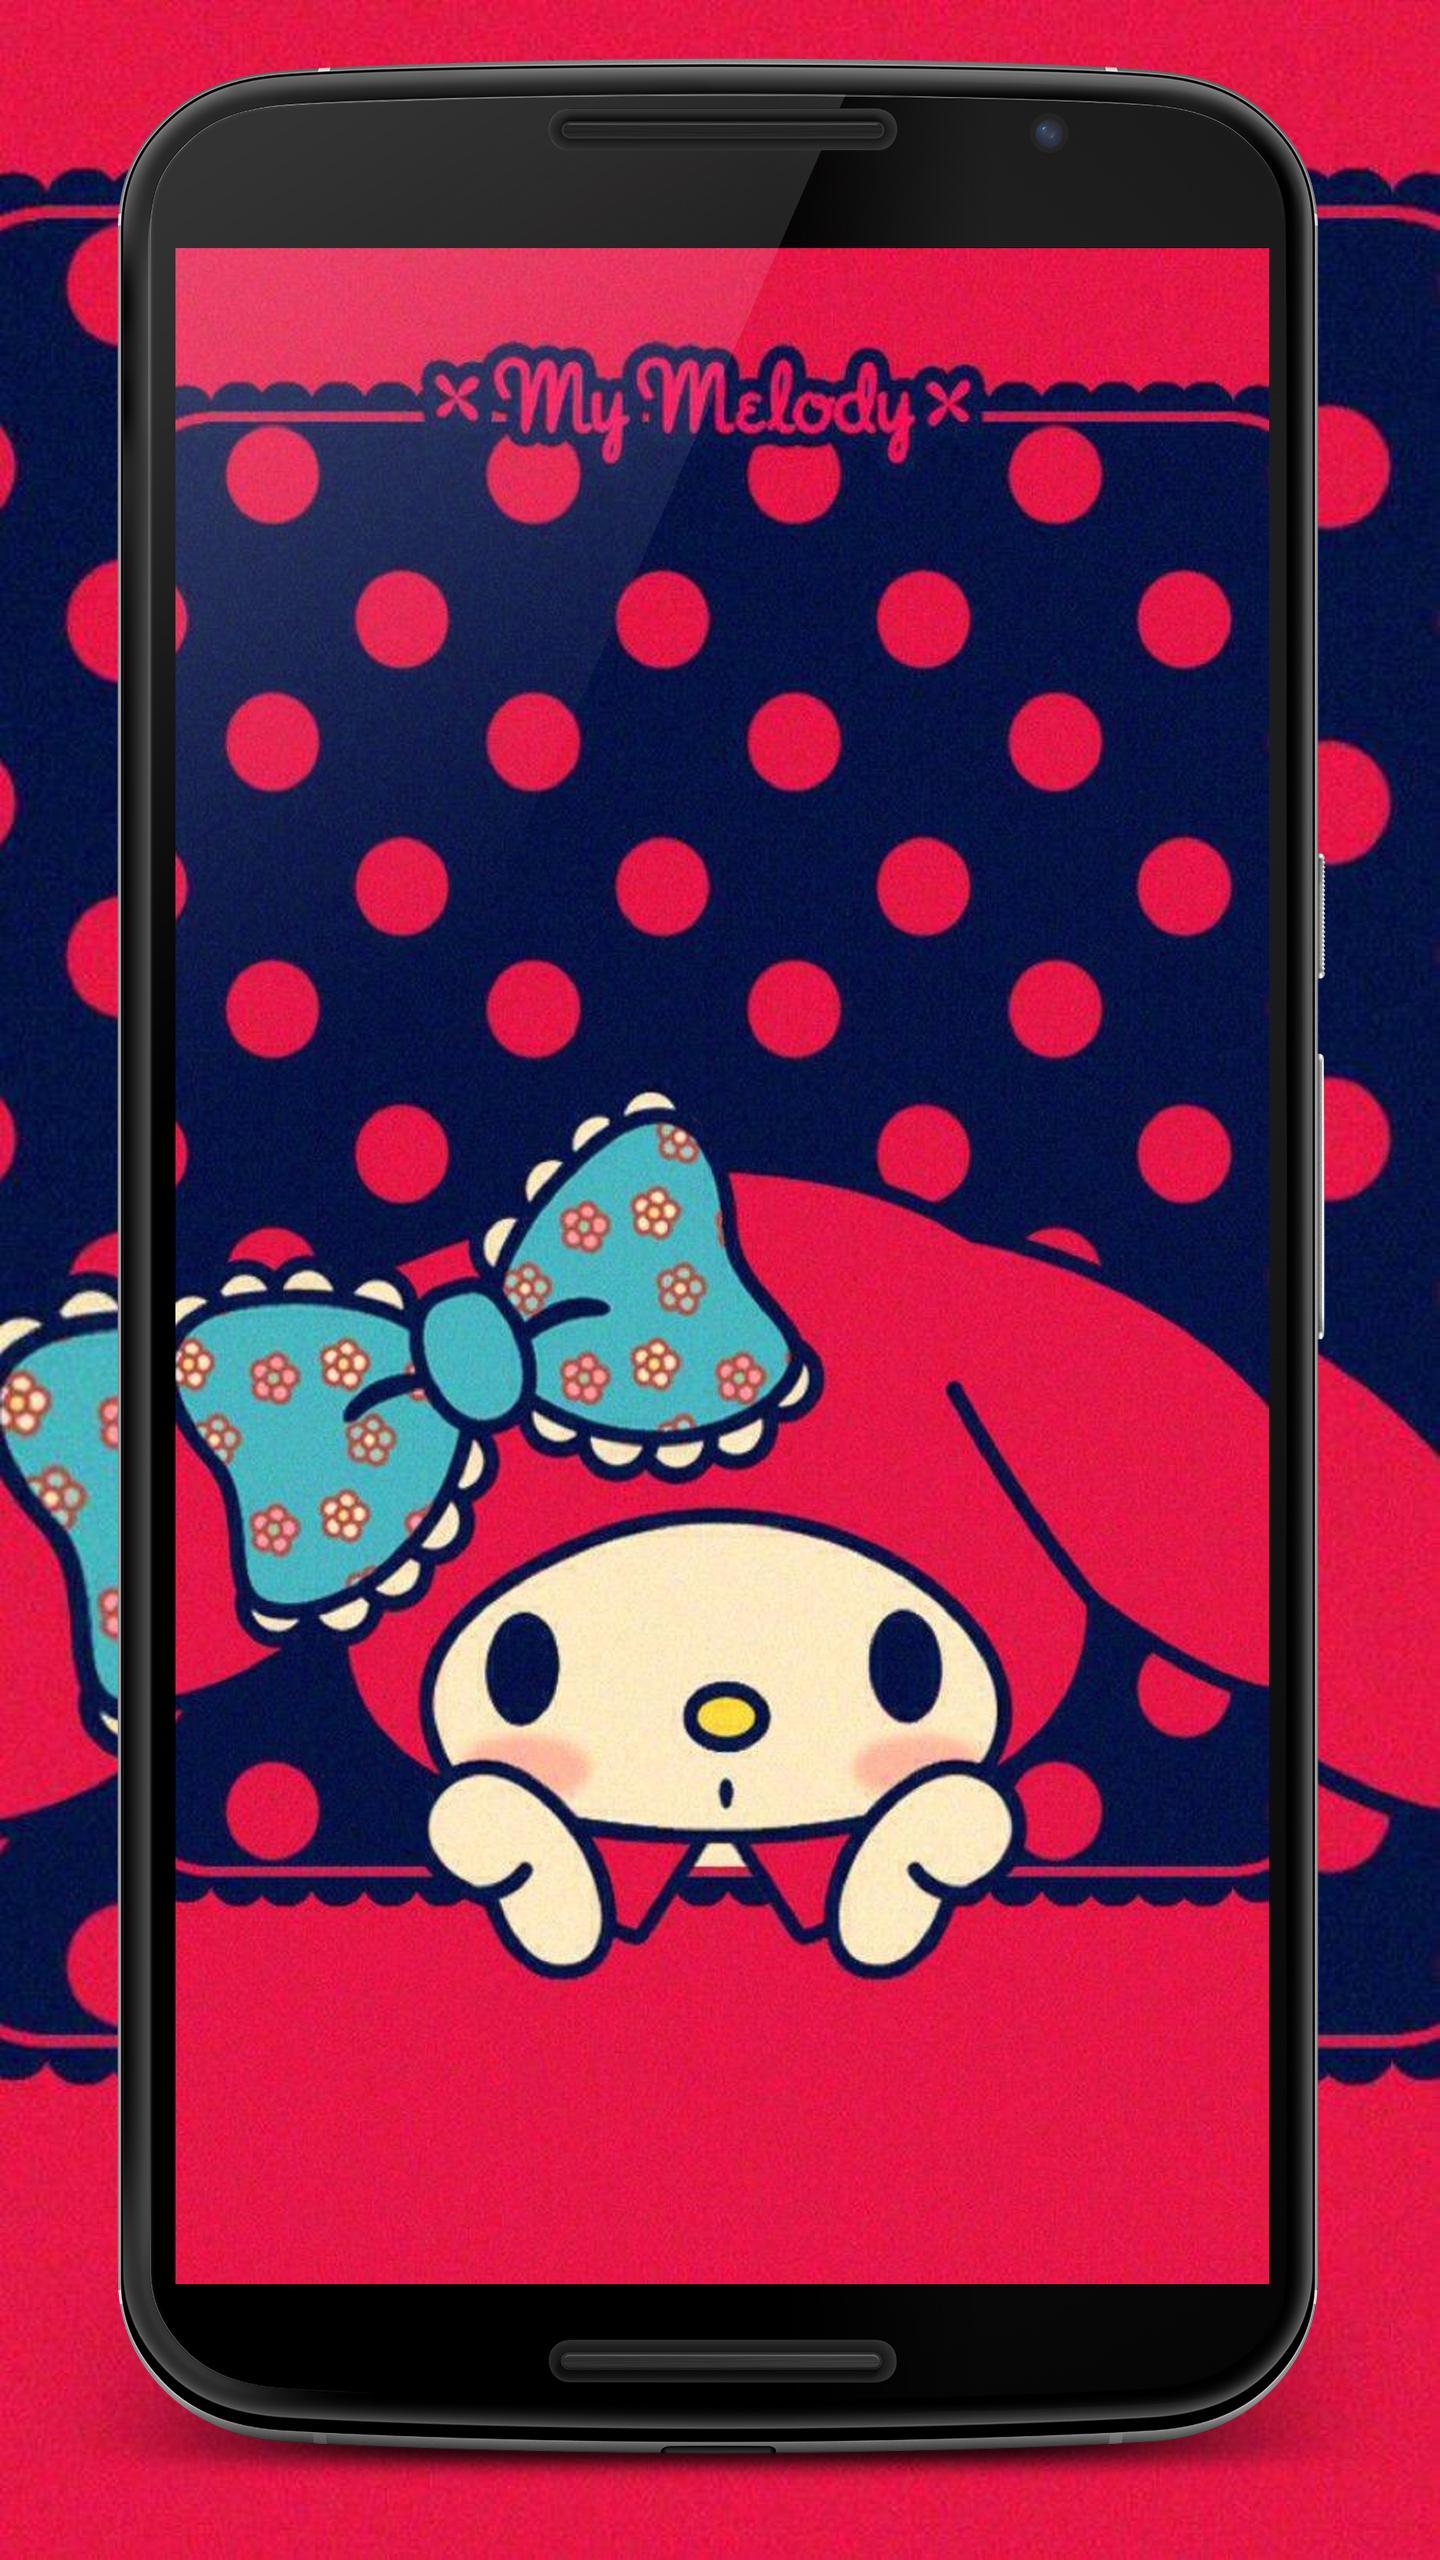 Wallpaper Melo Lucu For Android Apk Download